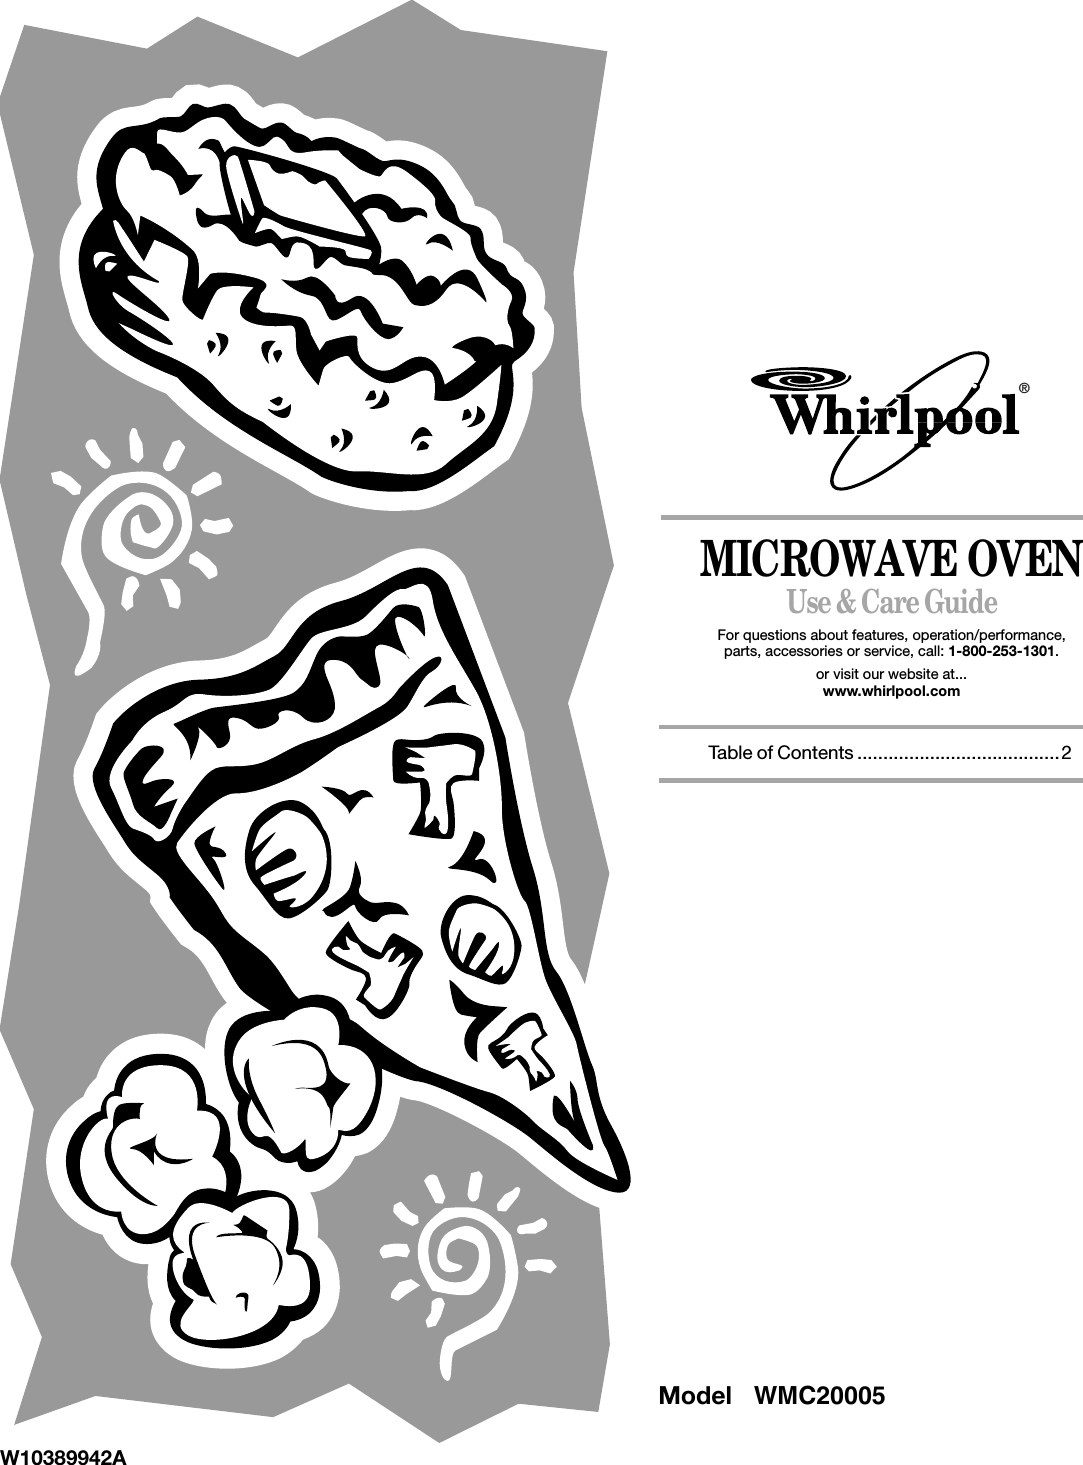 MICROWAVE OVENUse &amp; Care GuideFor questions about features, operation/performance,parts, accessories or service, call: 1-800-253-1301.or visit our website at...www.whirlpool.comTable of Contents .......................................2W10389942A®Model  WMC20005